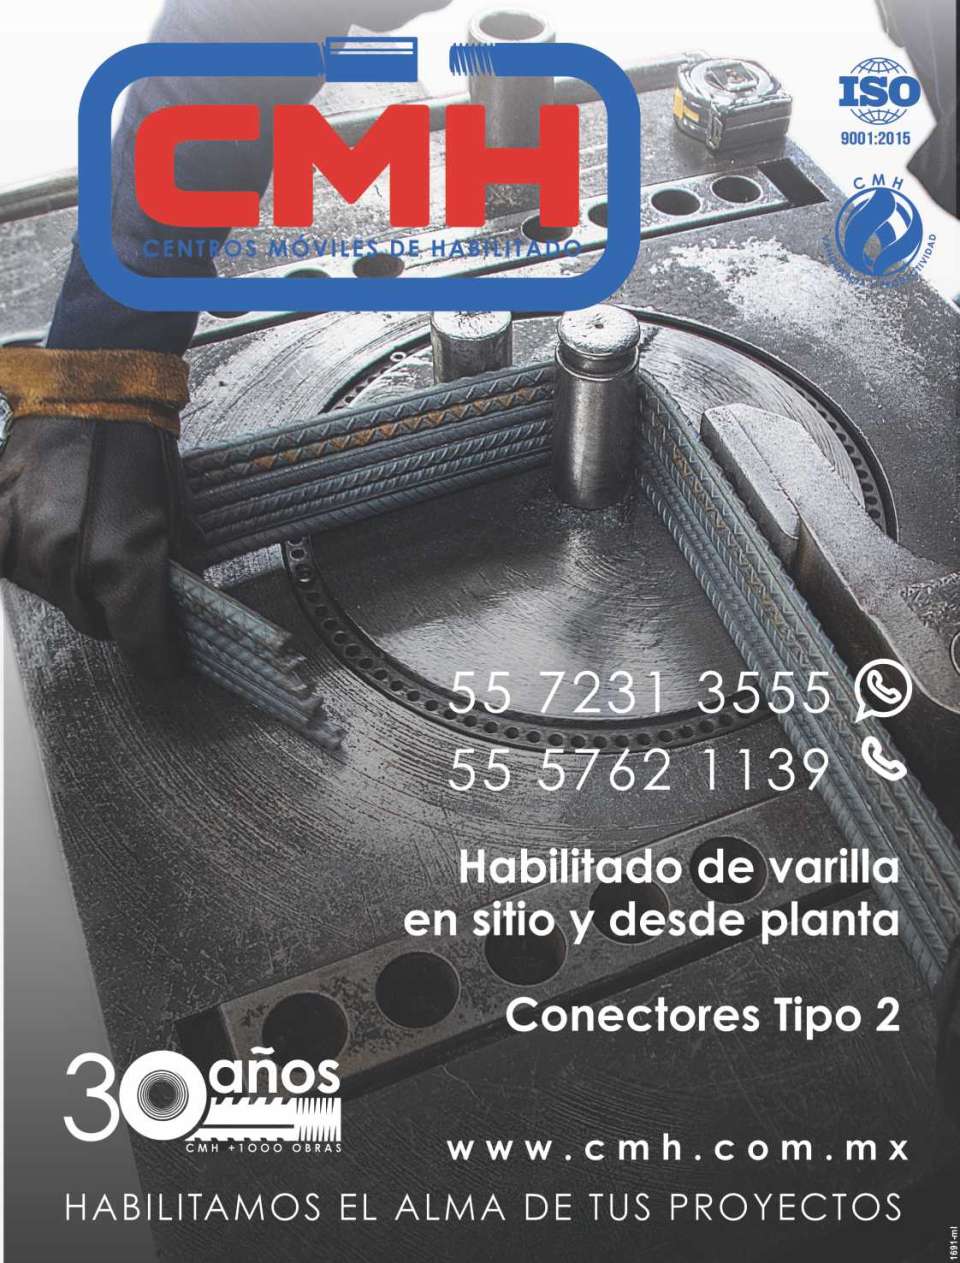 Rod enabled on site and from the plant, Type 2 Mechanical Connectors, Maxima Technology in Connections, with ACI318 regulations and current construction regulations of the CDMX.